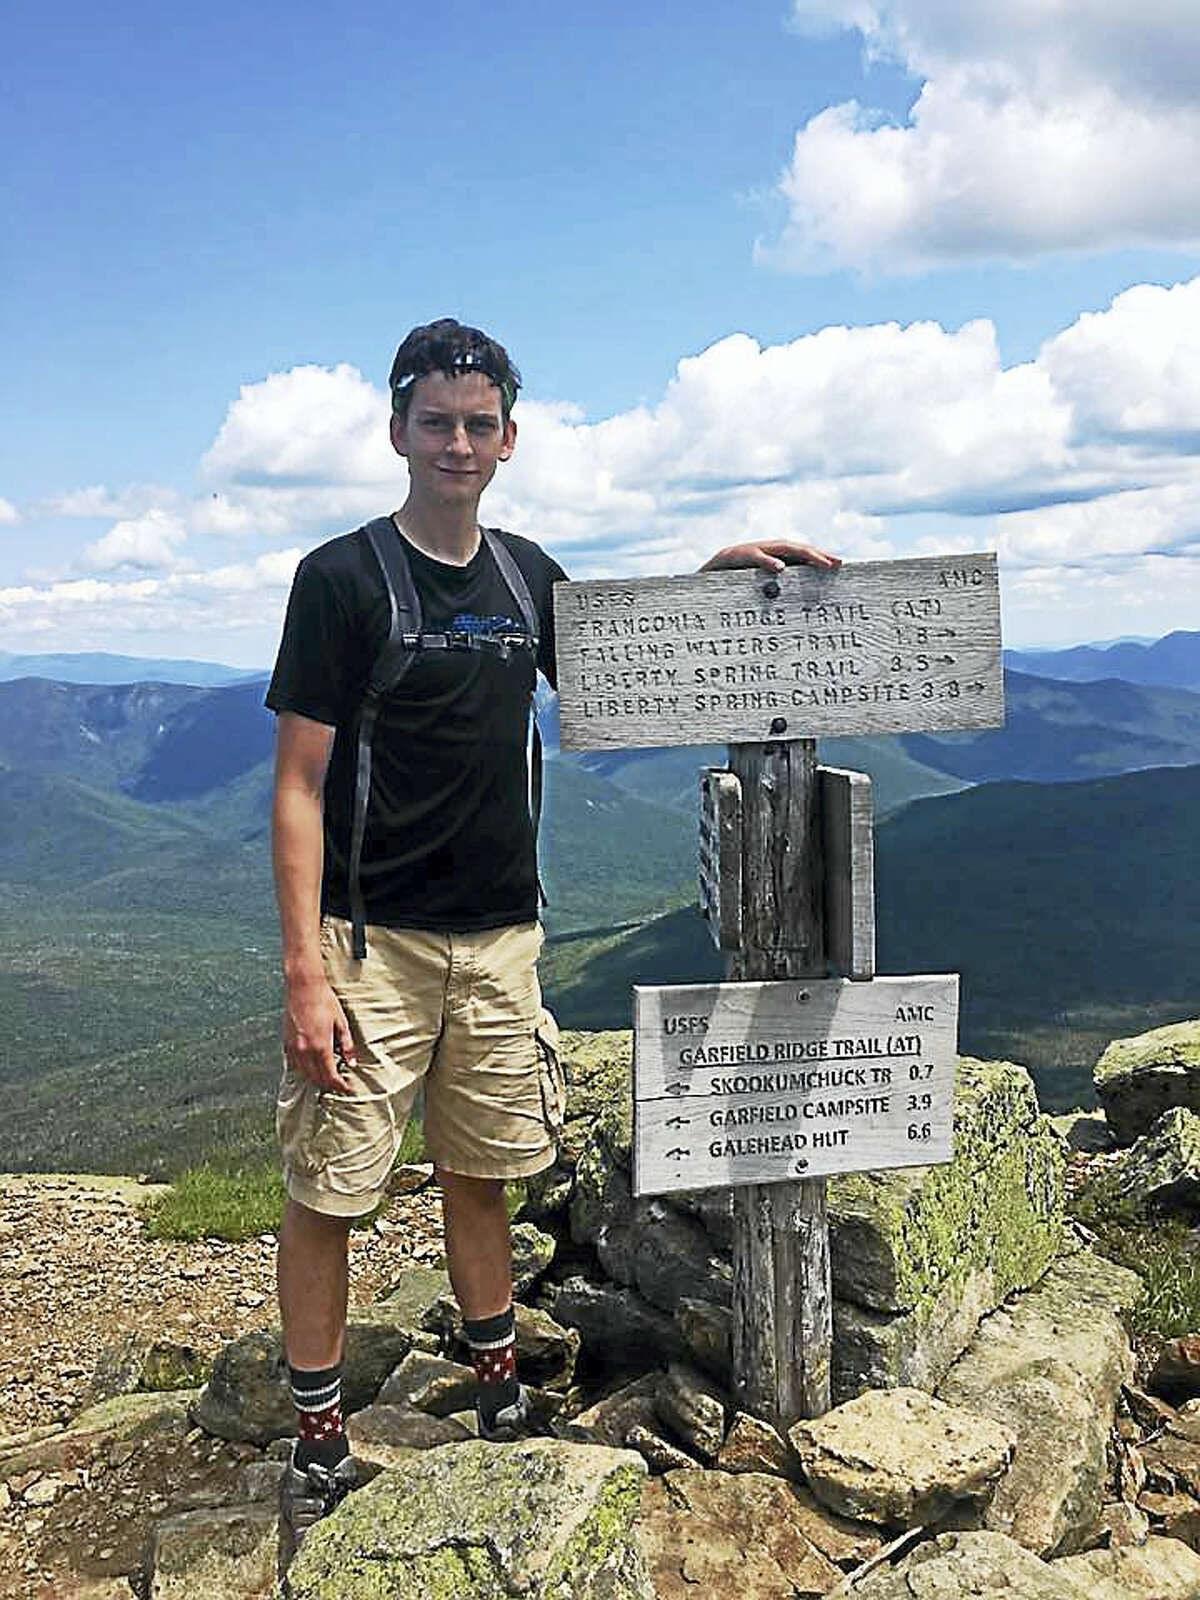 In June, Mark Adamiak hiked the Franconia Notch Ridge in New Hampshire with a group of friends. Outside of work, says Adamiak, a 2010 graduate of Middletown High School who grew up in the city, he spends a lot of time outdoors and being active.